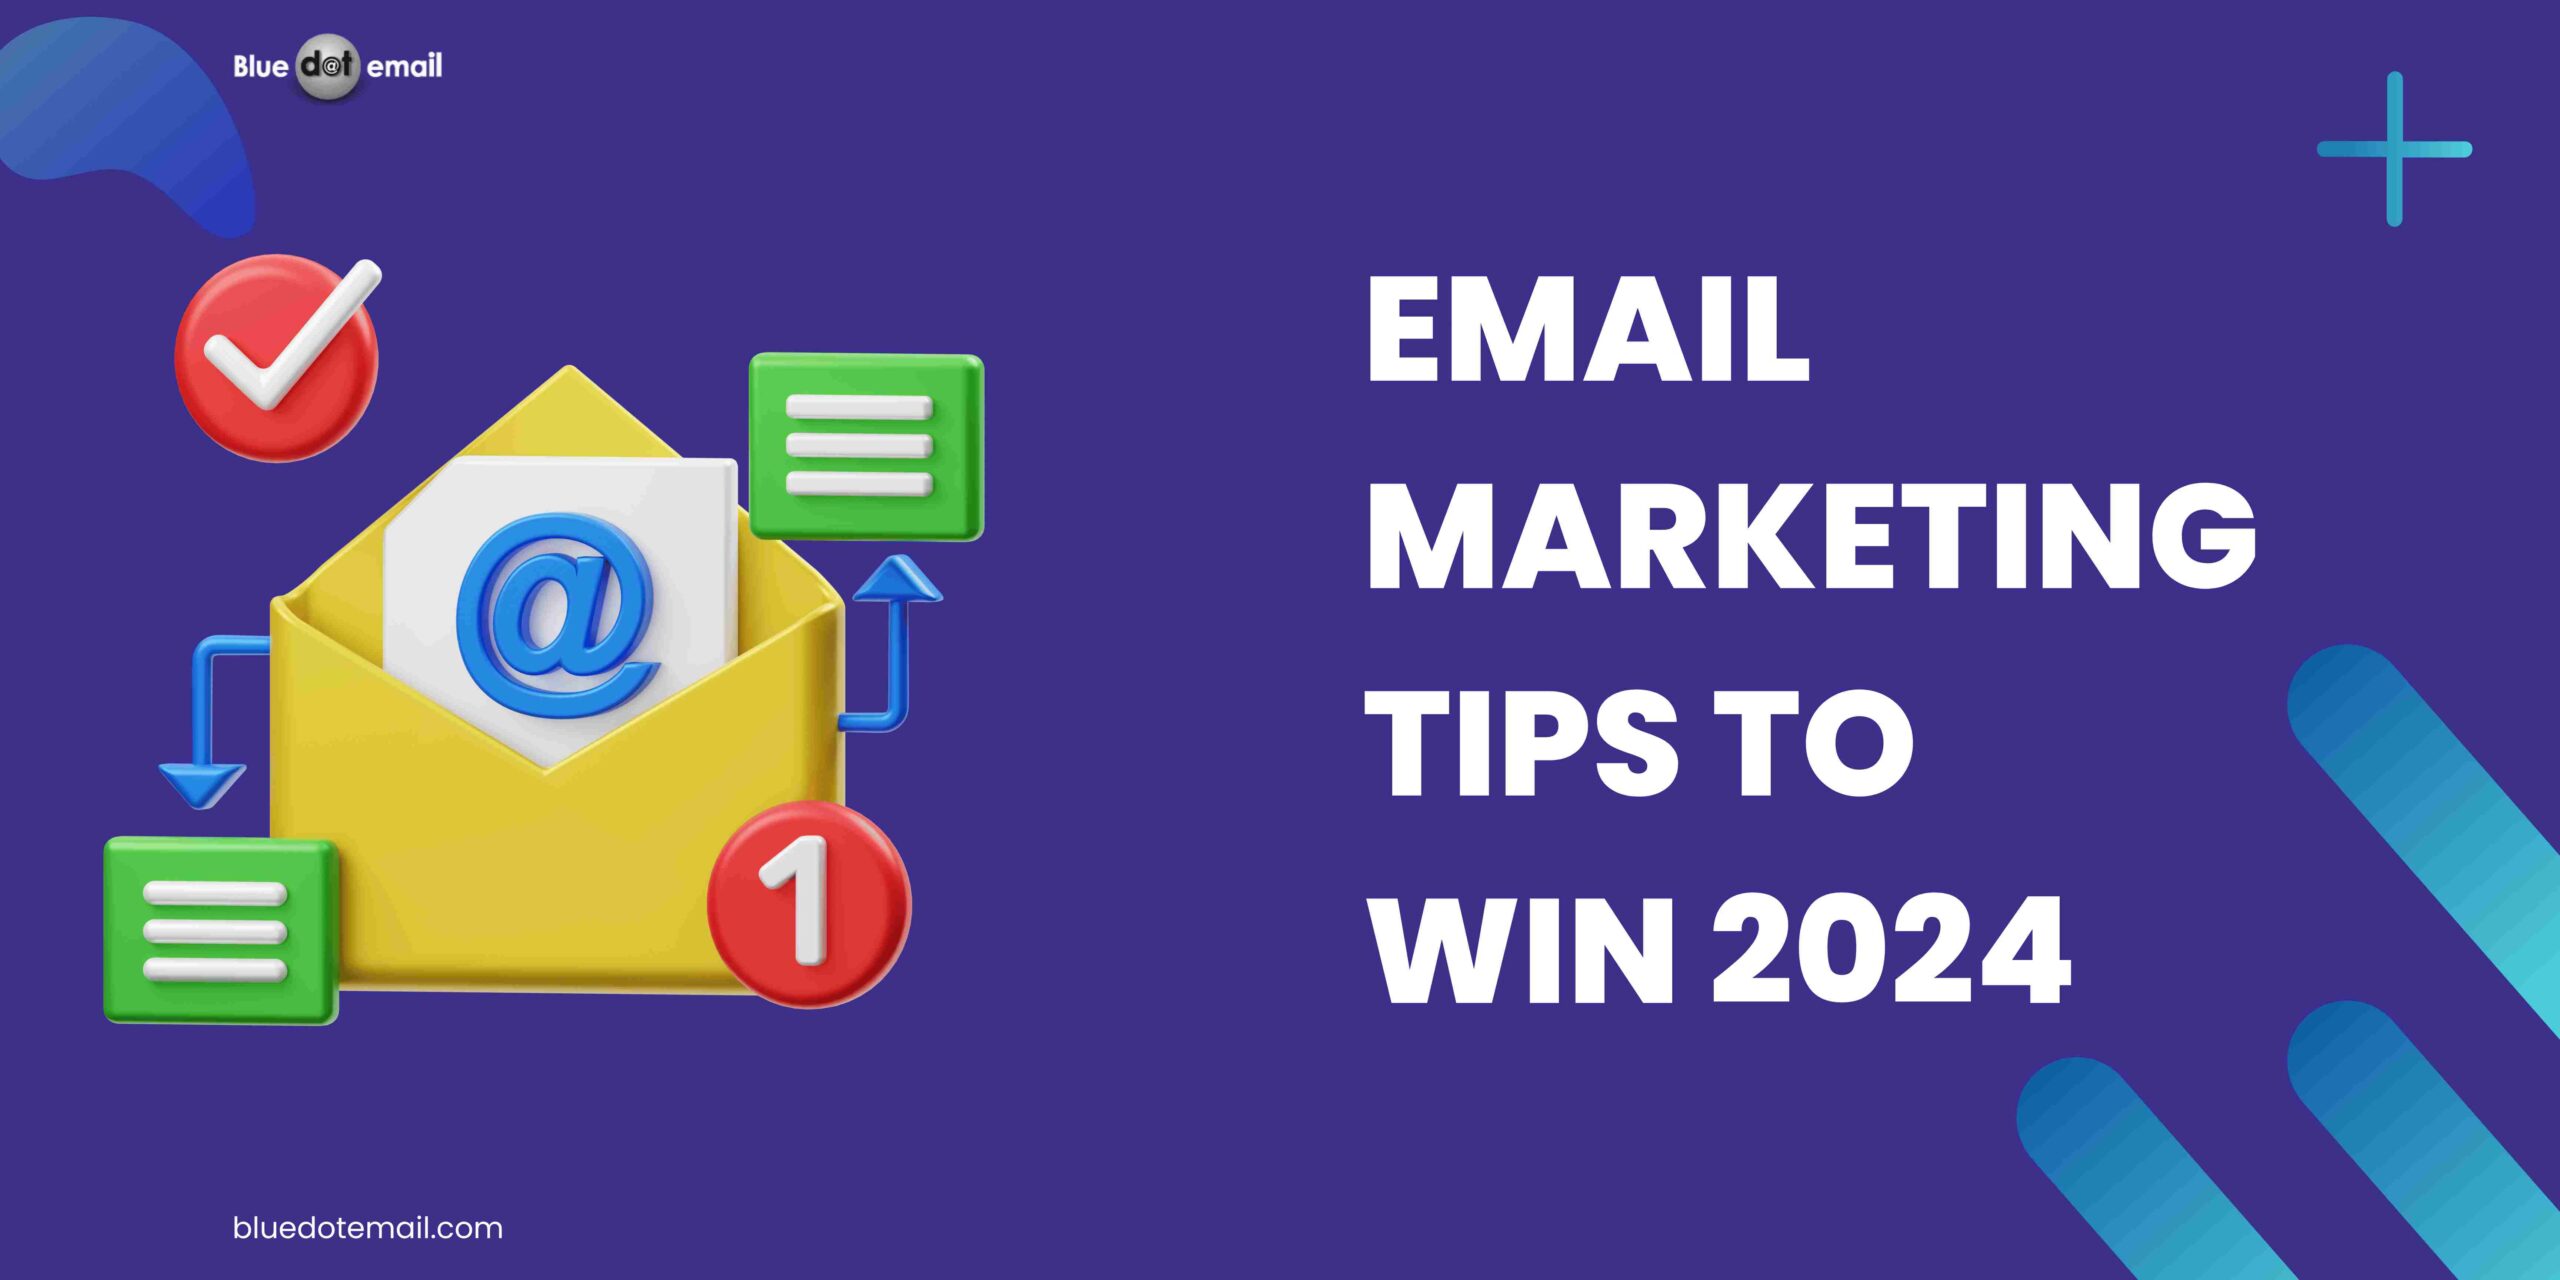 Email Marketing Tips to Win 2024